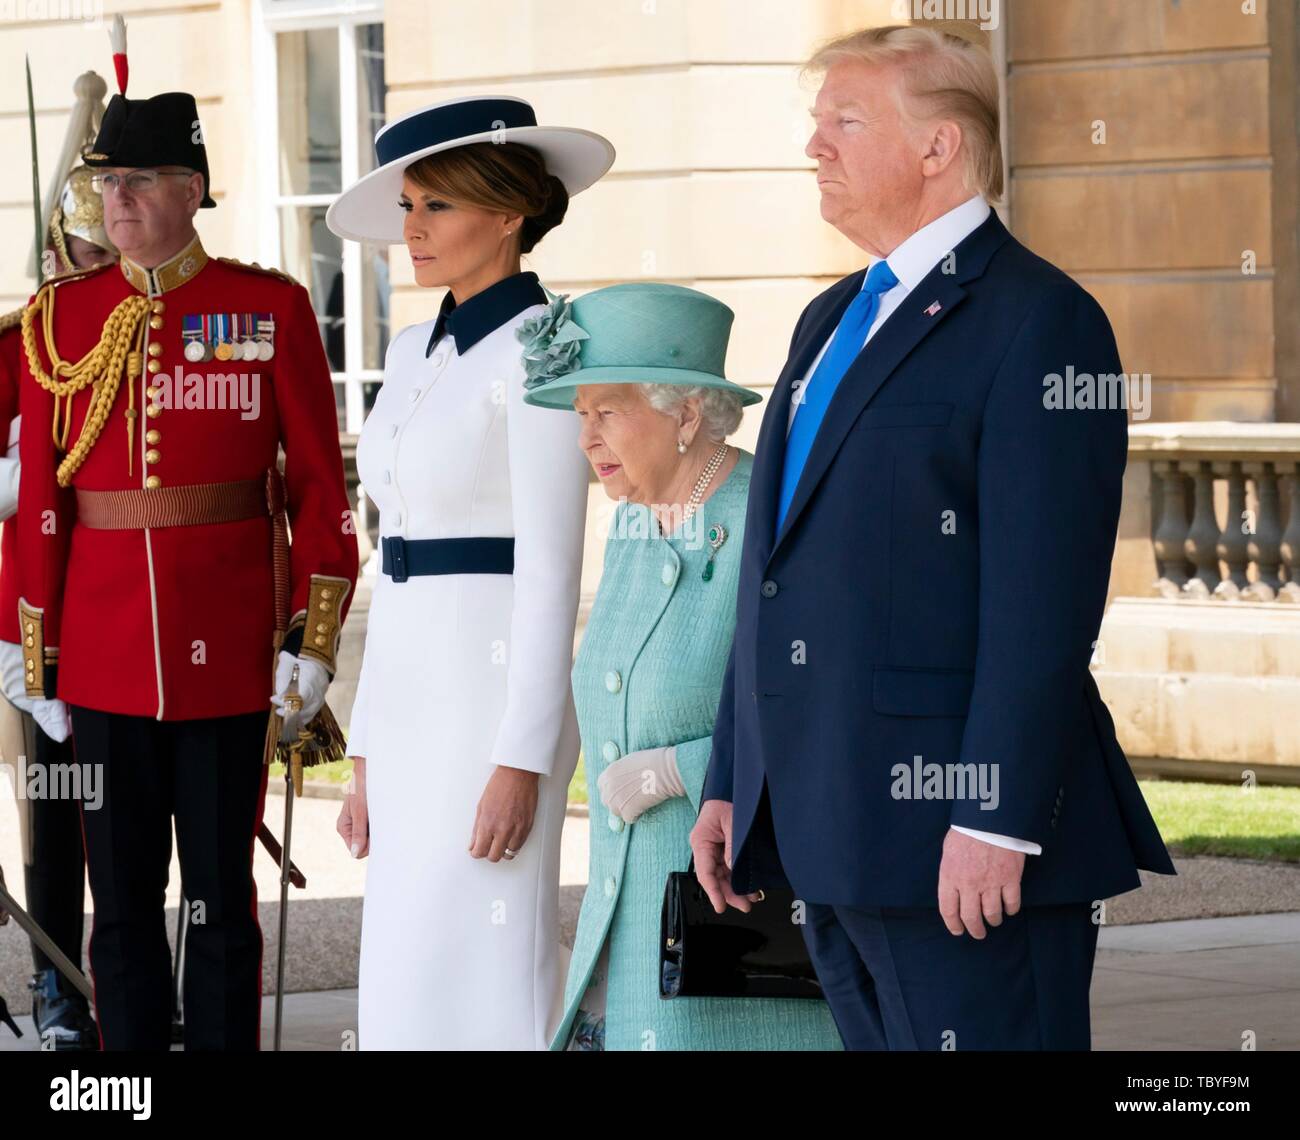 London, UK. 03rd June, 2019. U.S President Donald Trump, stands with First Lady Melania Trump, and Queen Elizabeth II for the national anthems during the official welcoming ceremony at Buckingham Palace June 3, 2019 in London, England. Credit: Planetpix/Alamy Live News Stock Photo